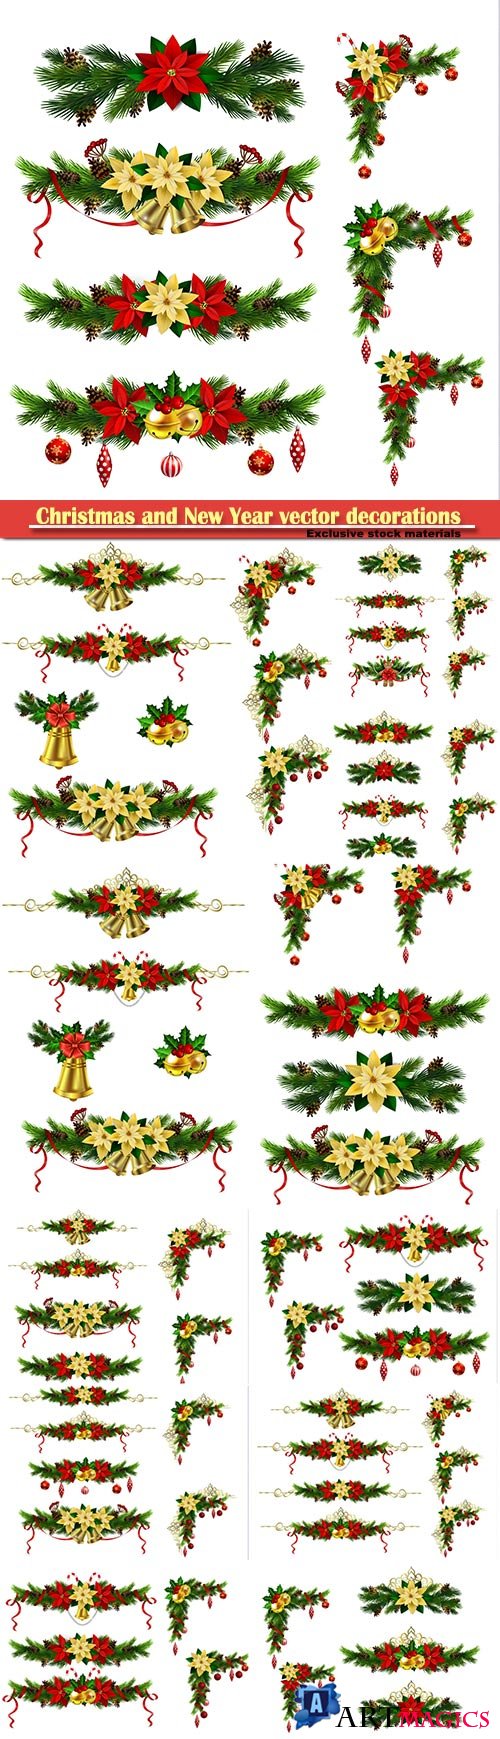 Christmas and New Year vector decorations with fir branches, red ribbons and bells